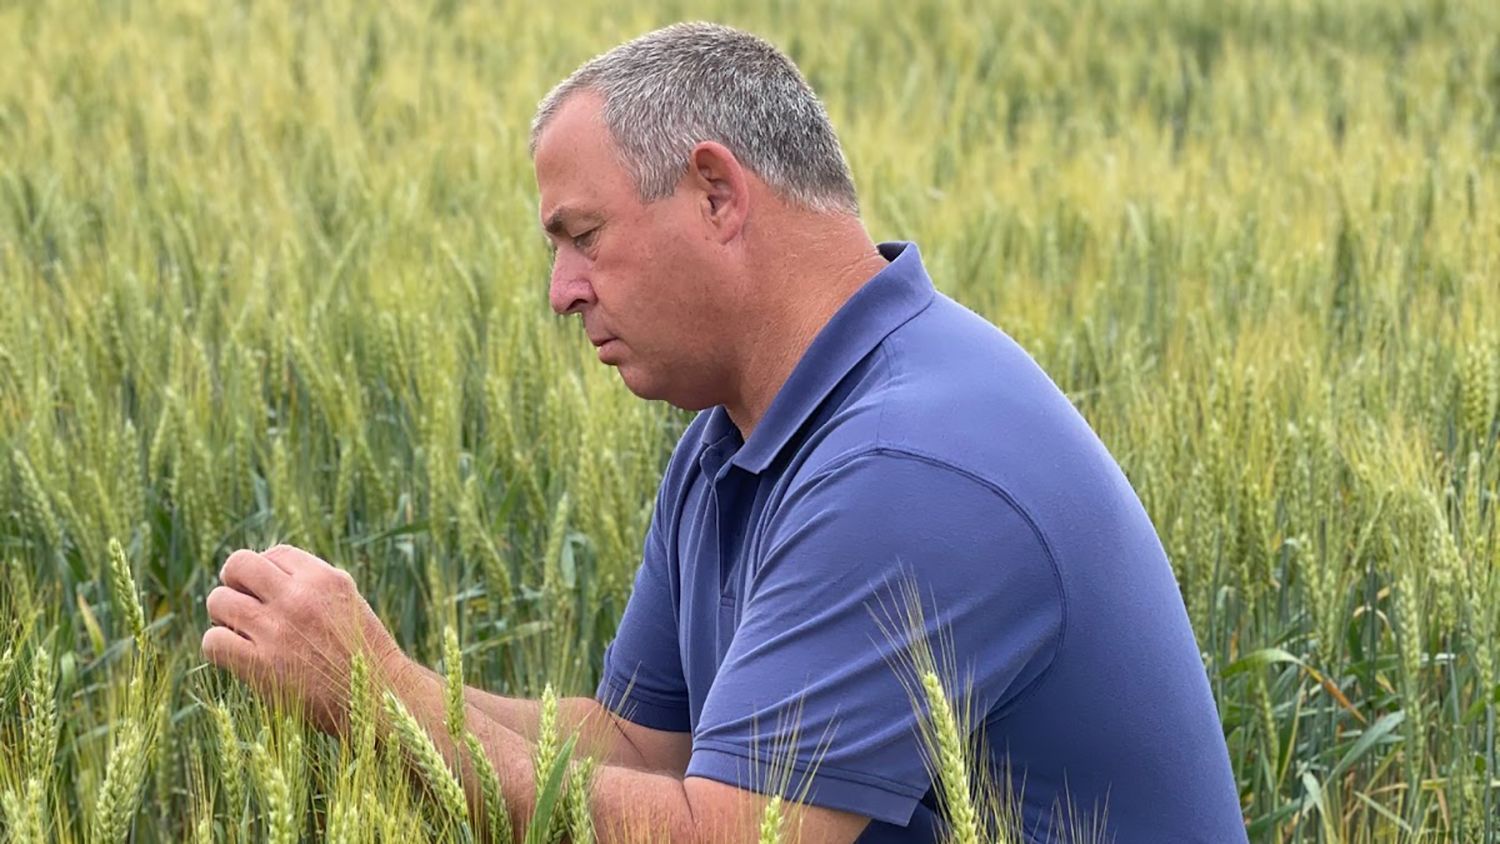 White male looking at wheat in a field